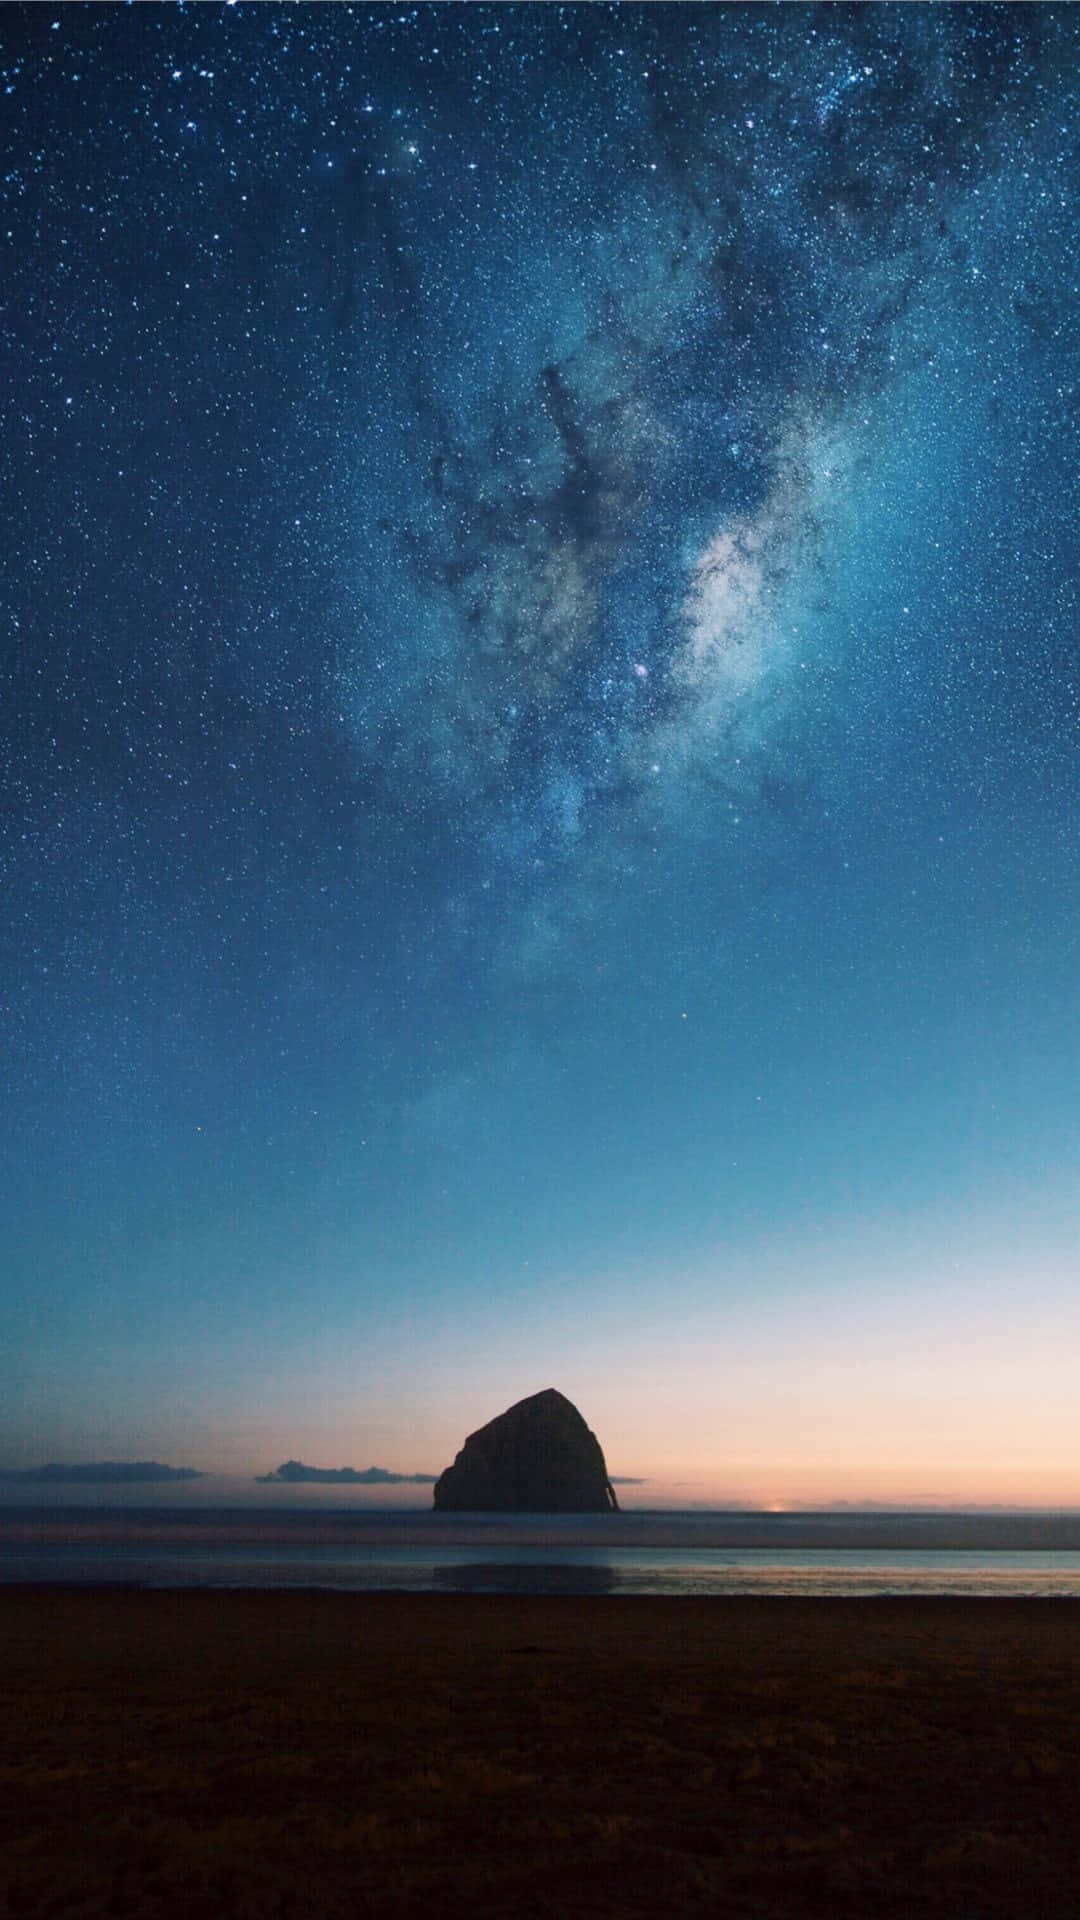 Unwind with a peaceful view on your iPhone Wallpaper